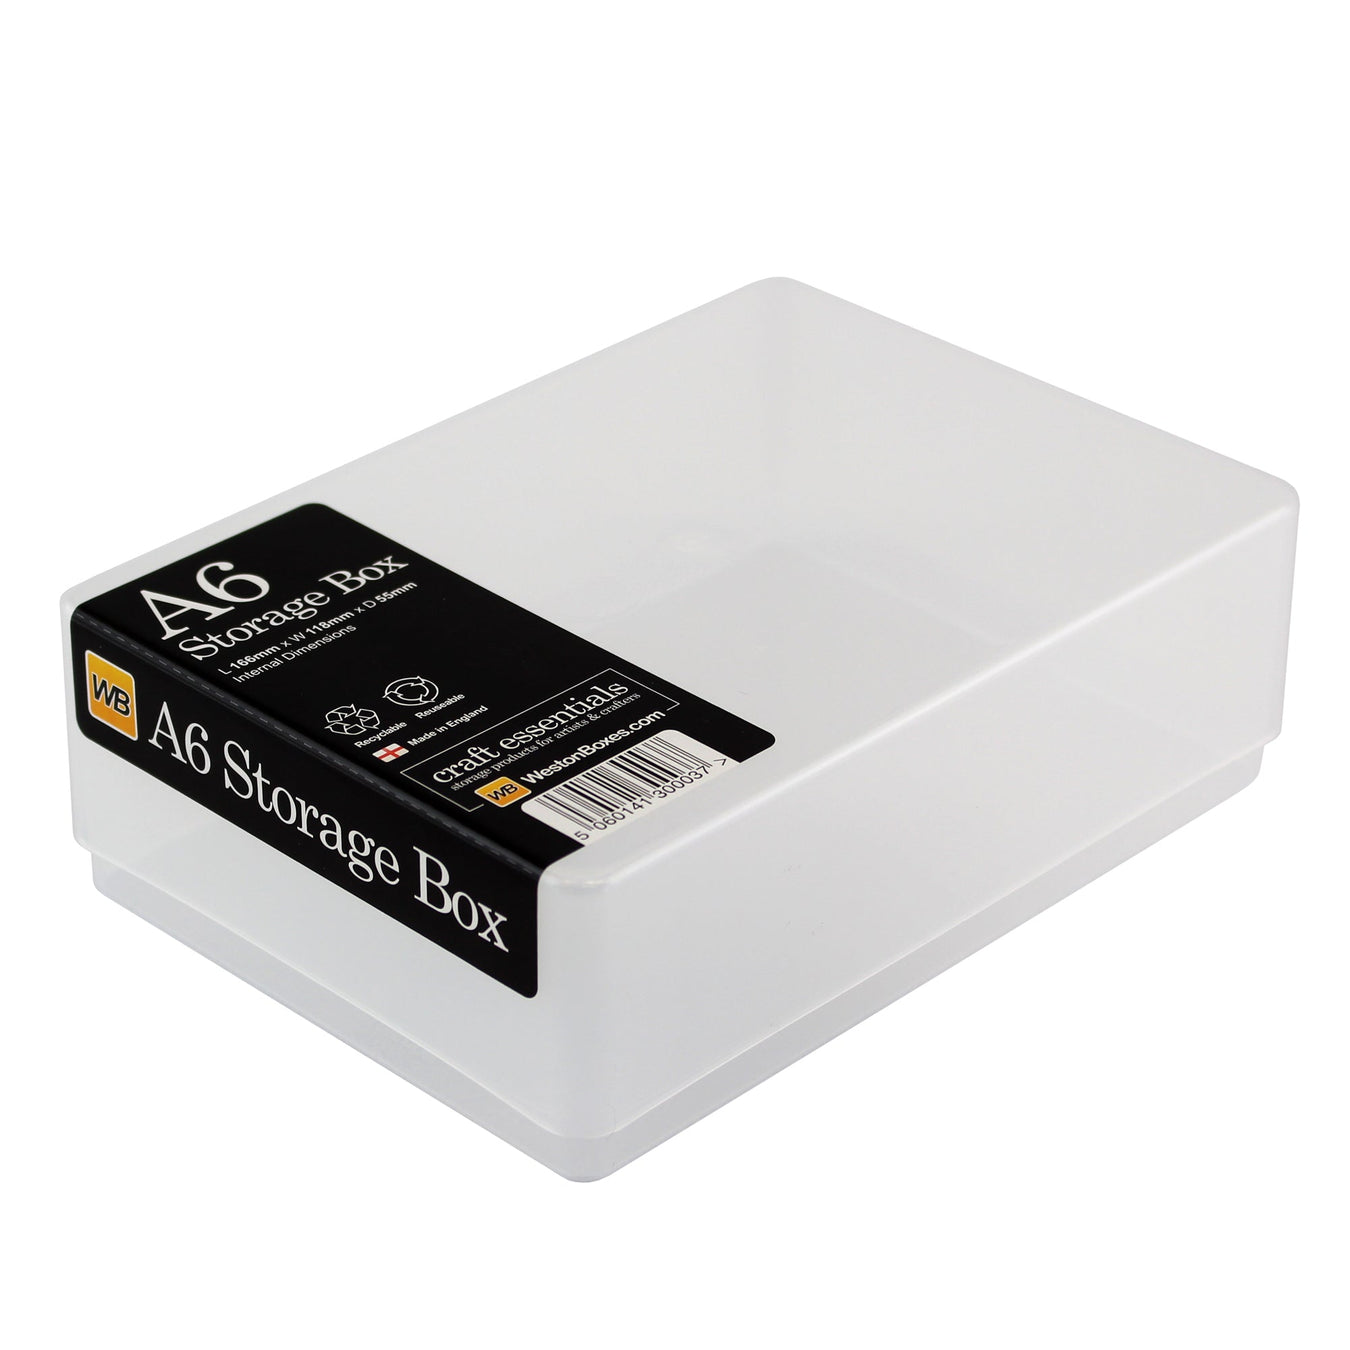 plastic a6 paper storage box with lid westonboxes